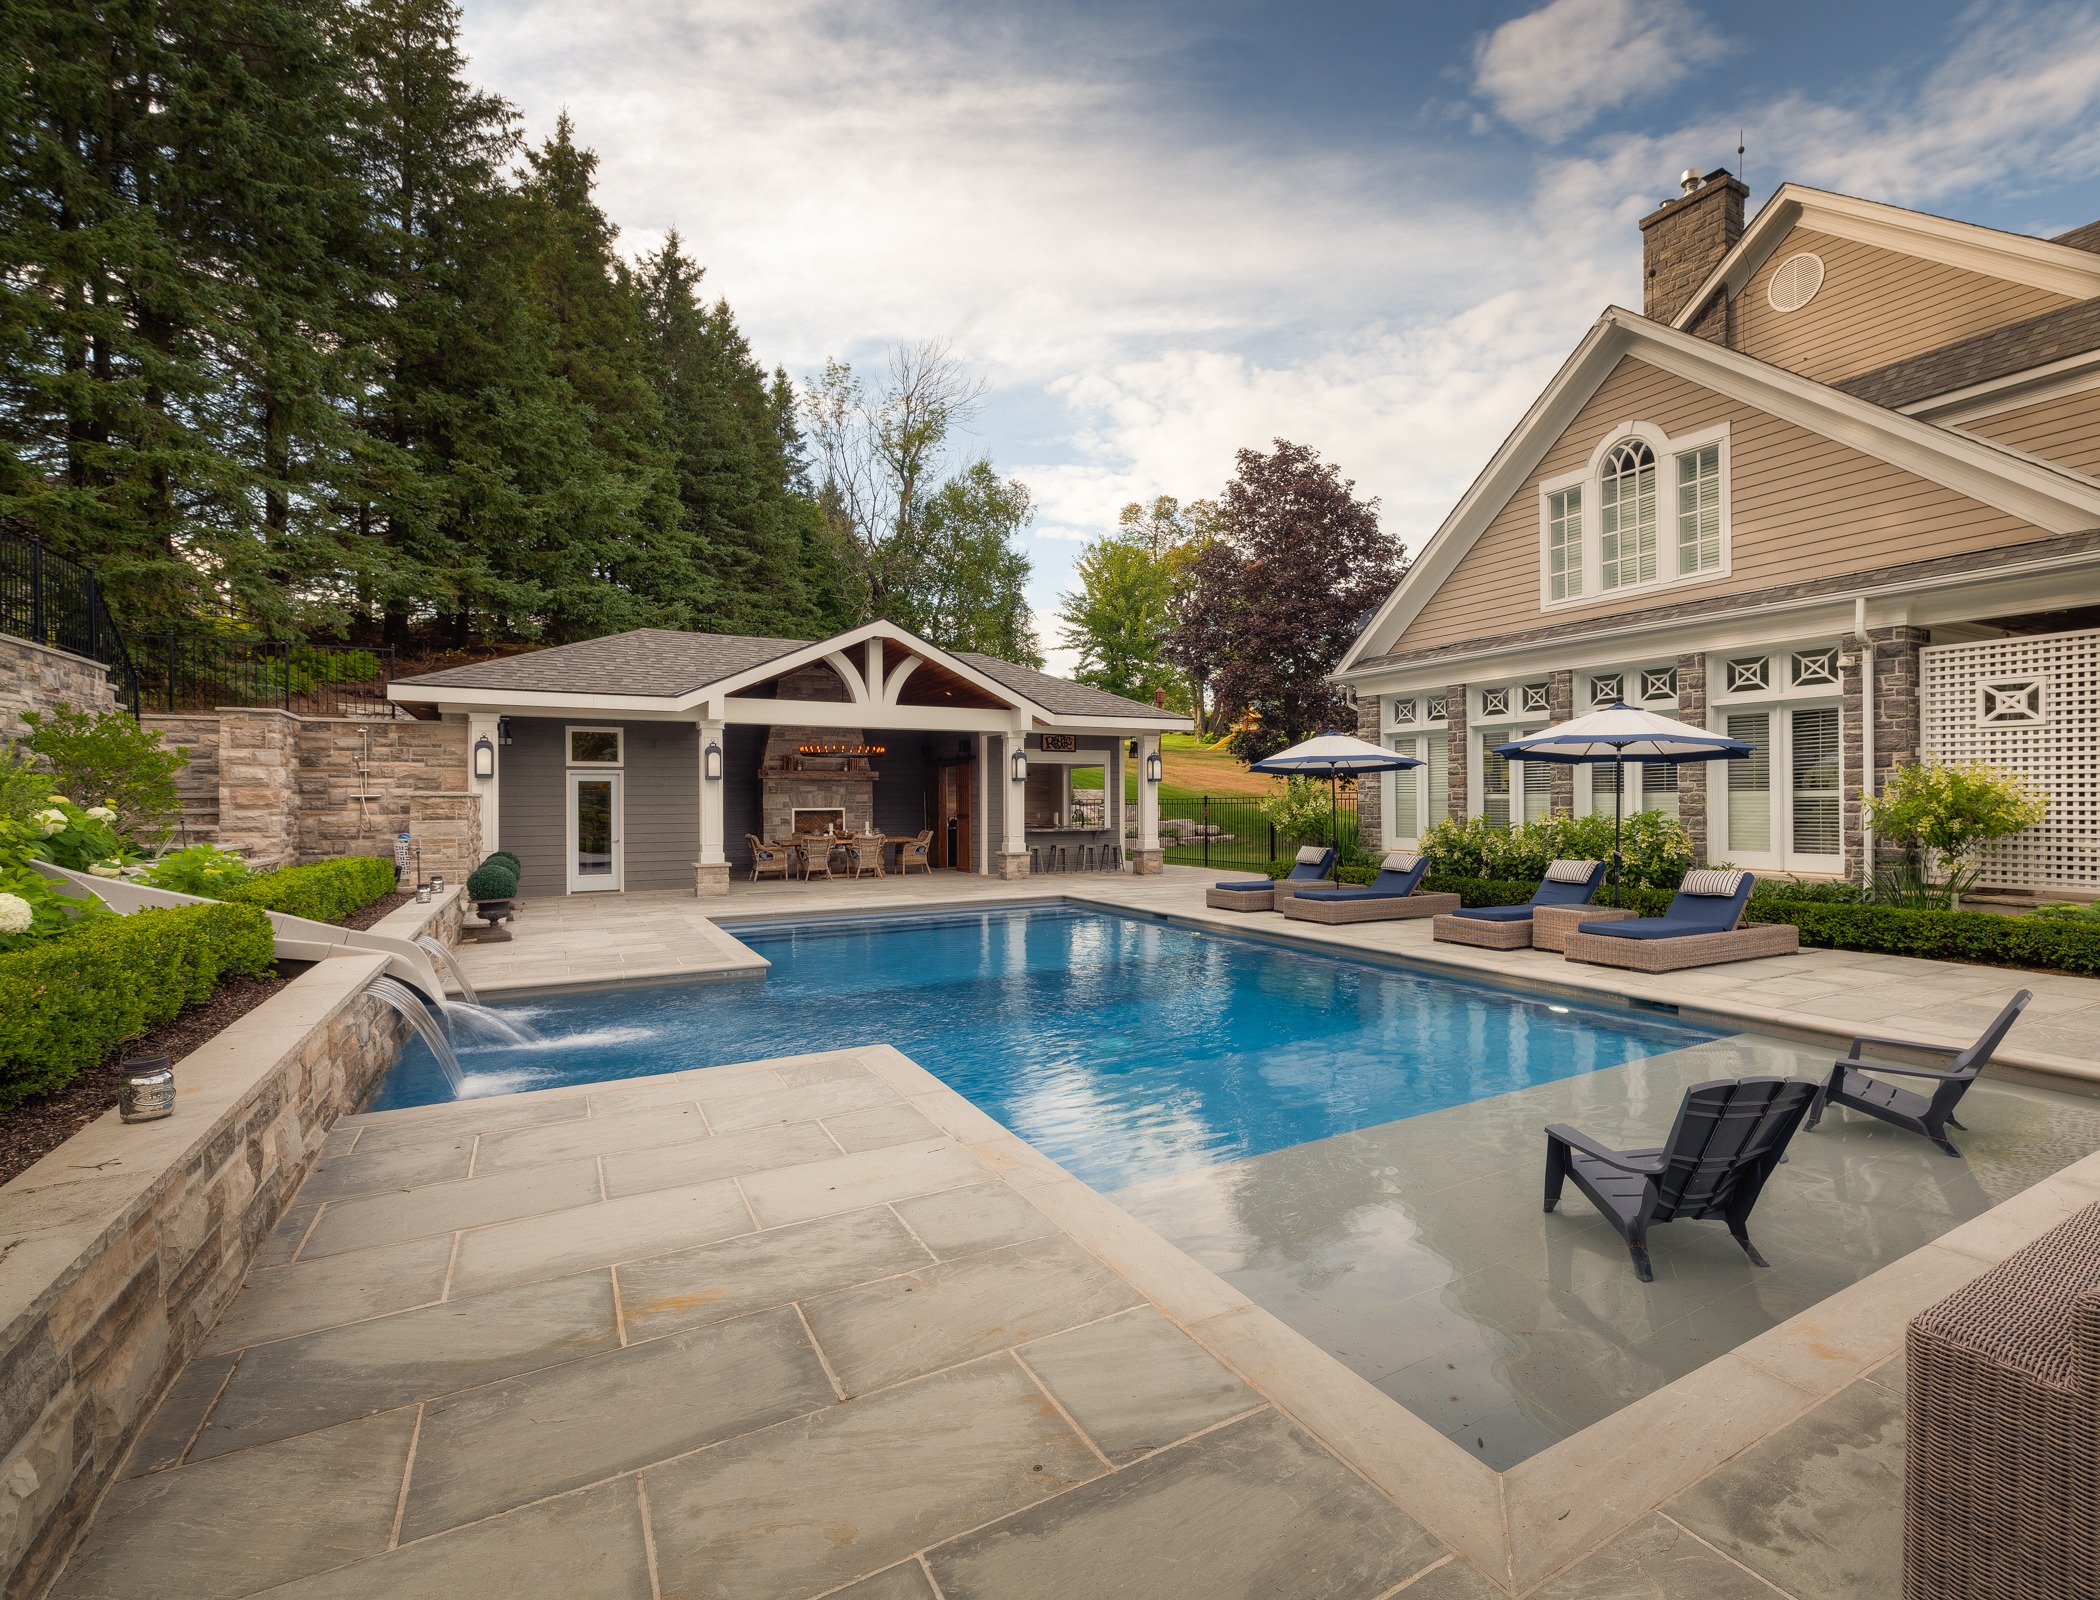 This image shows a luxurious backyard with a swimming pool, sun loungers, pool house, and a well-maintained garden against a backdrop of trees.